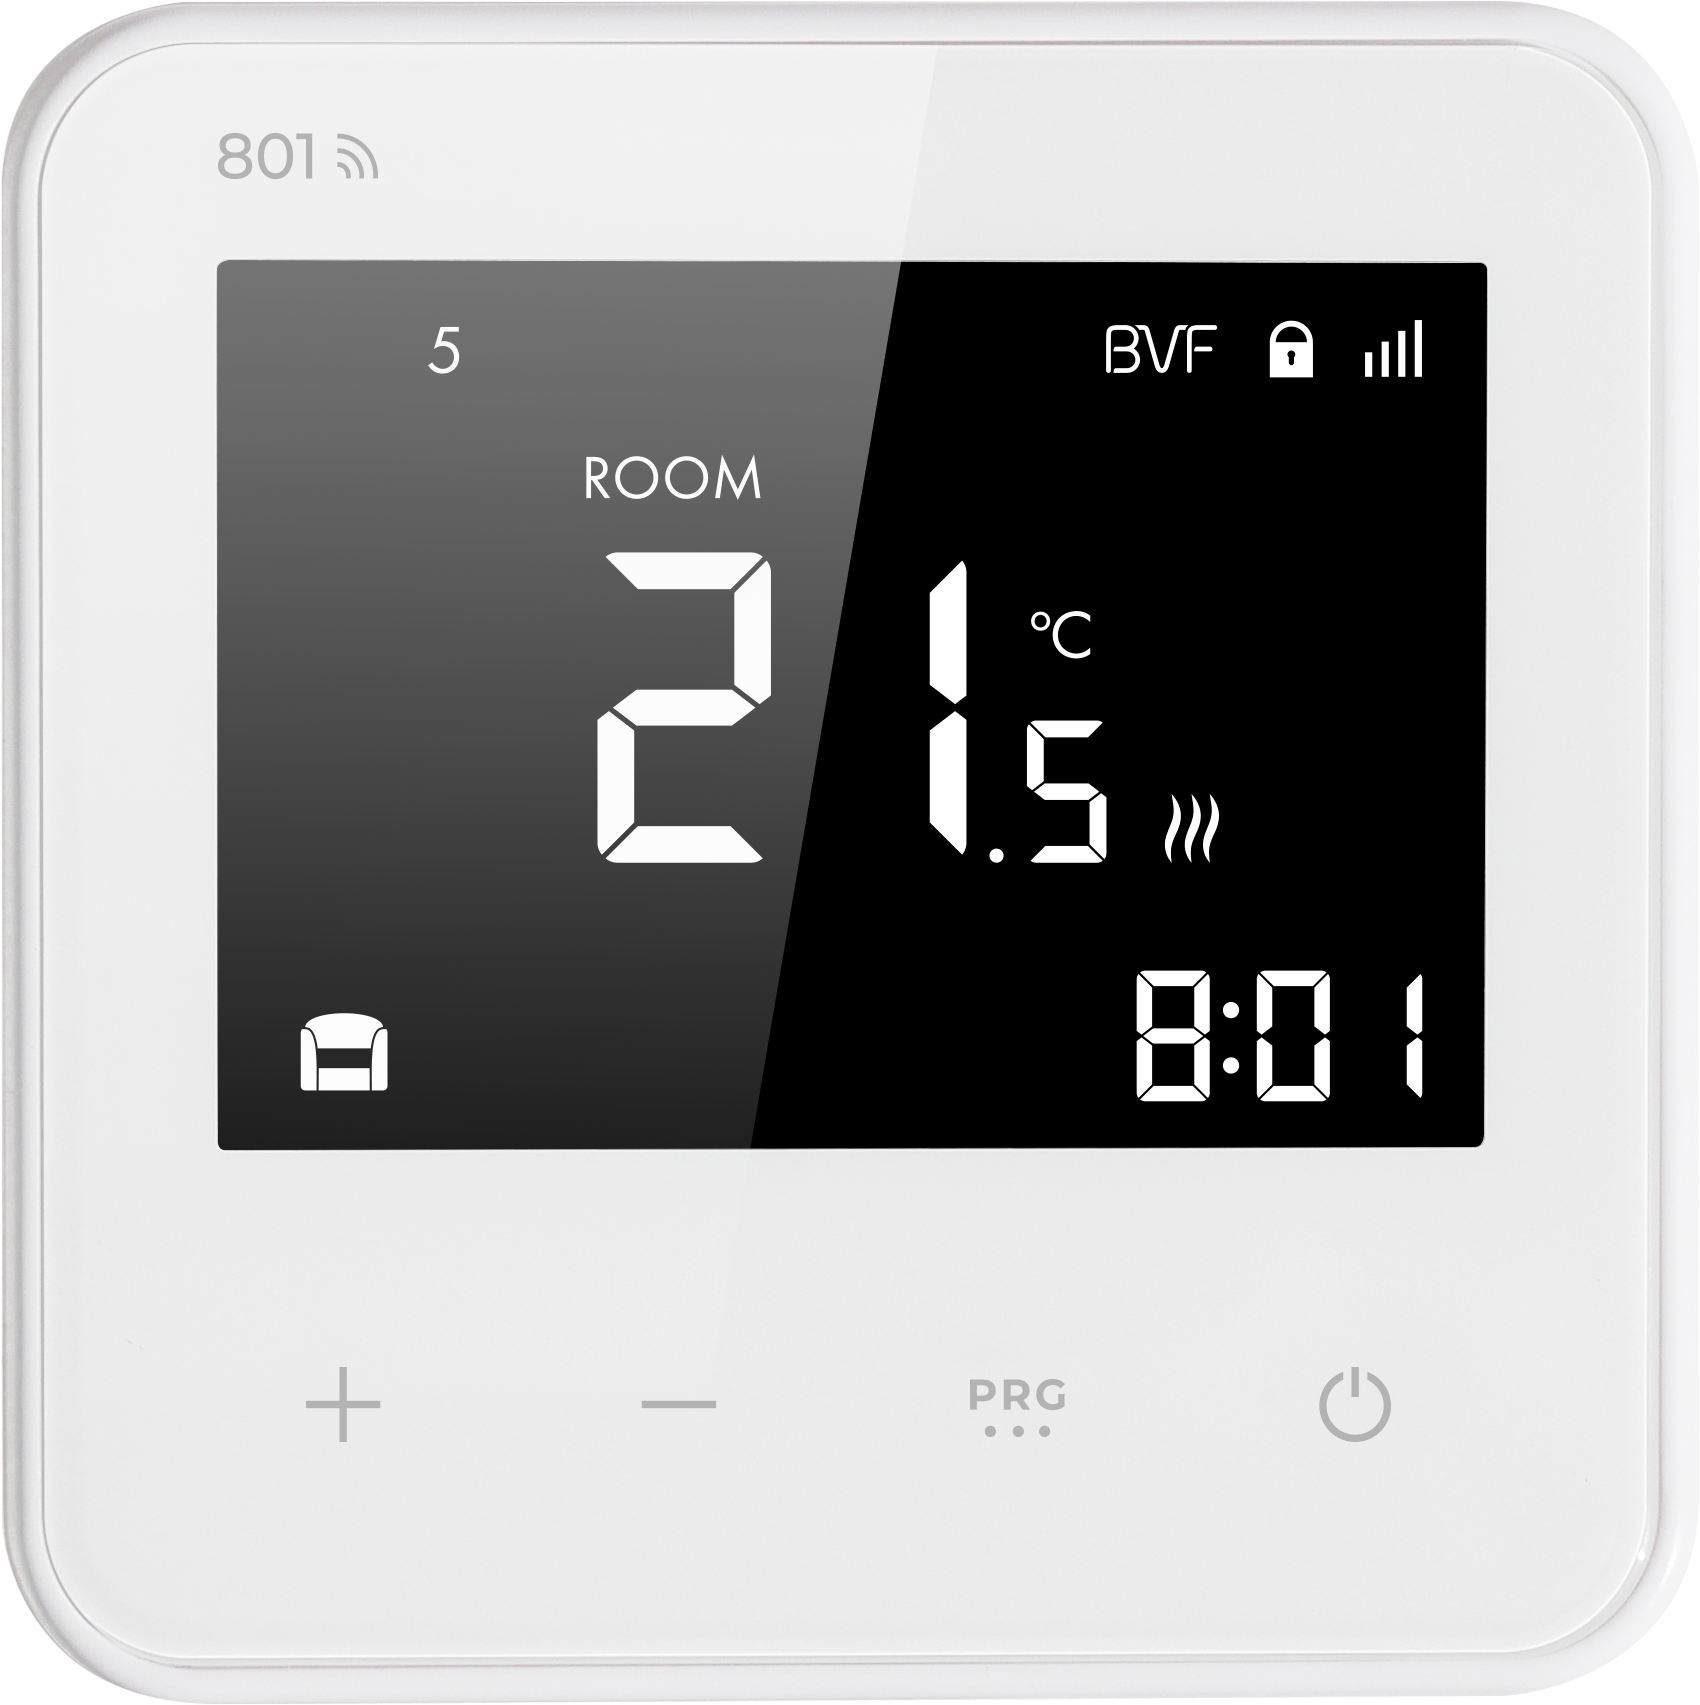 Programmable Thermostat, 801 via WiFi with mobile phone app. White.